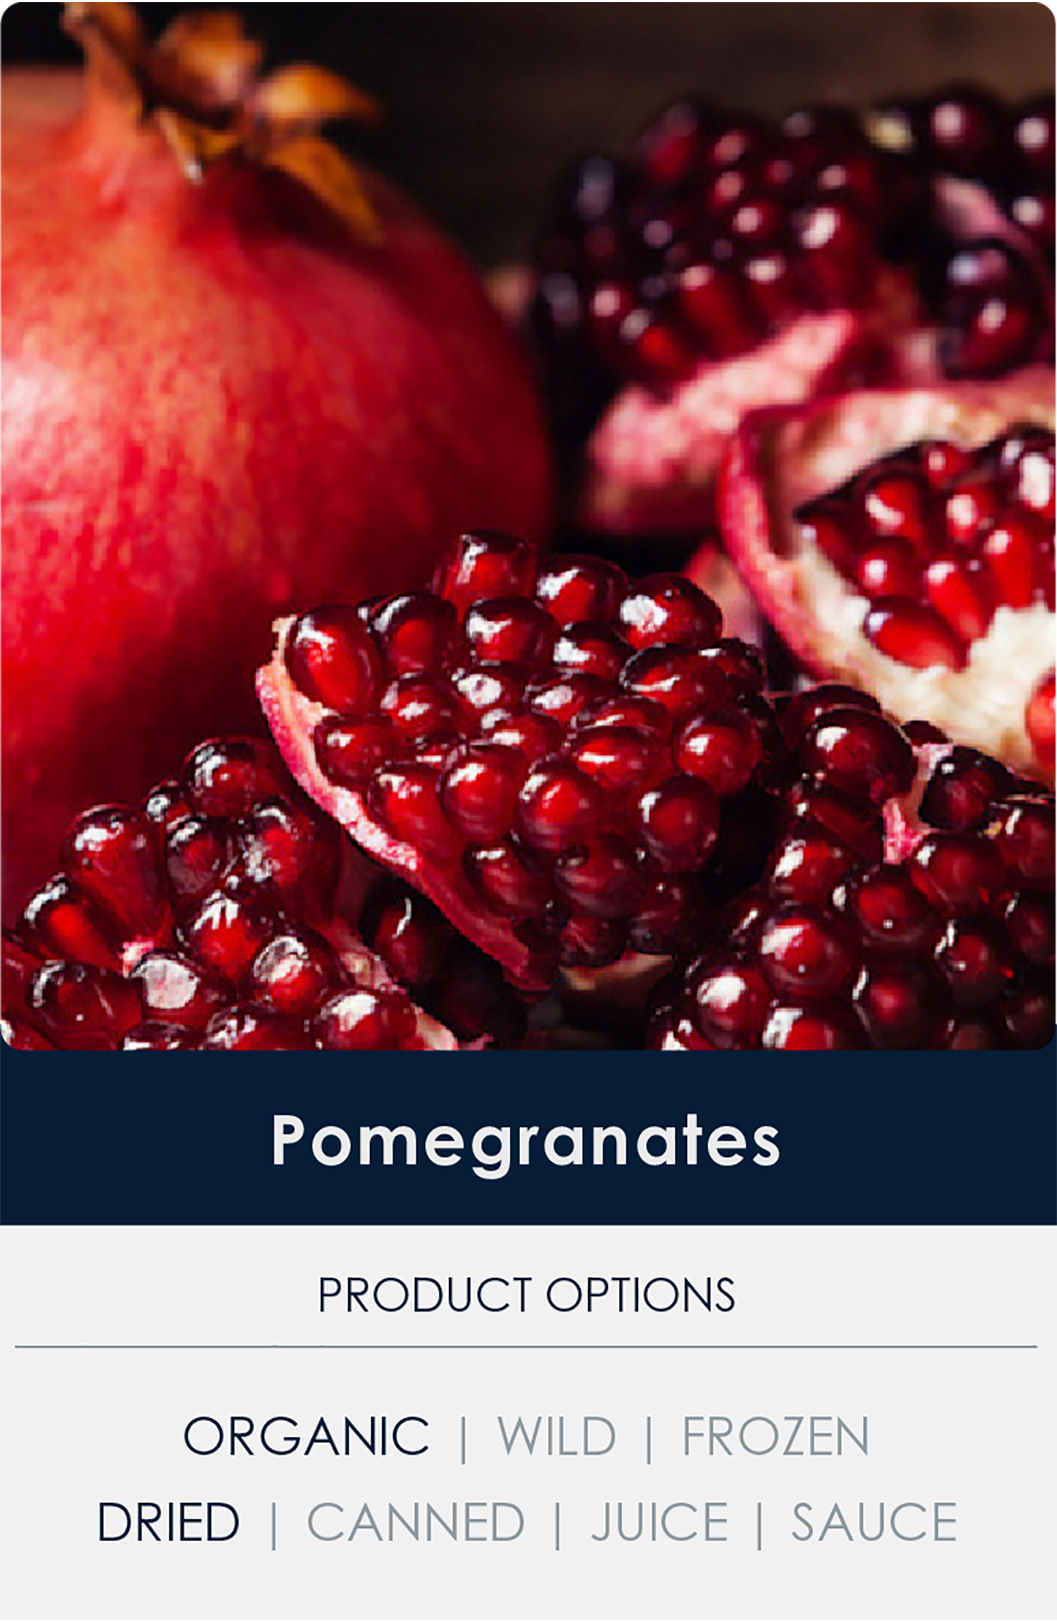 Pomegranates above a list of available product options: organic, wild, frozen, dried, canned, juice, sauce.